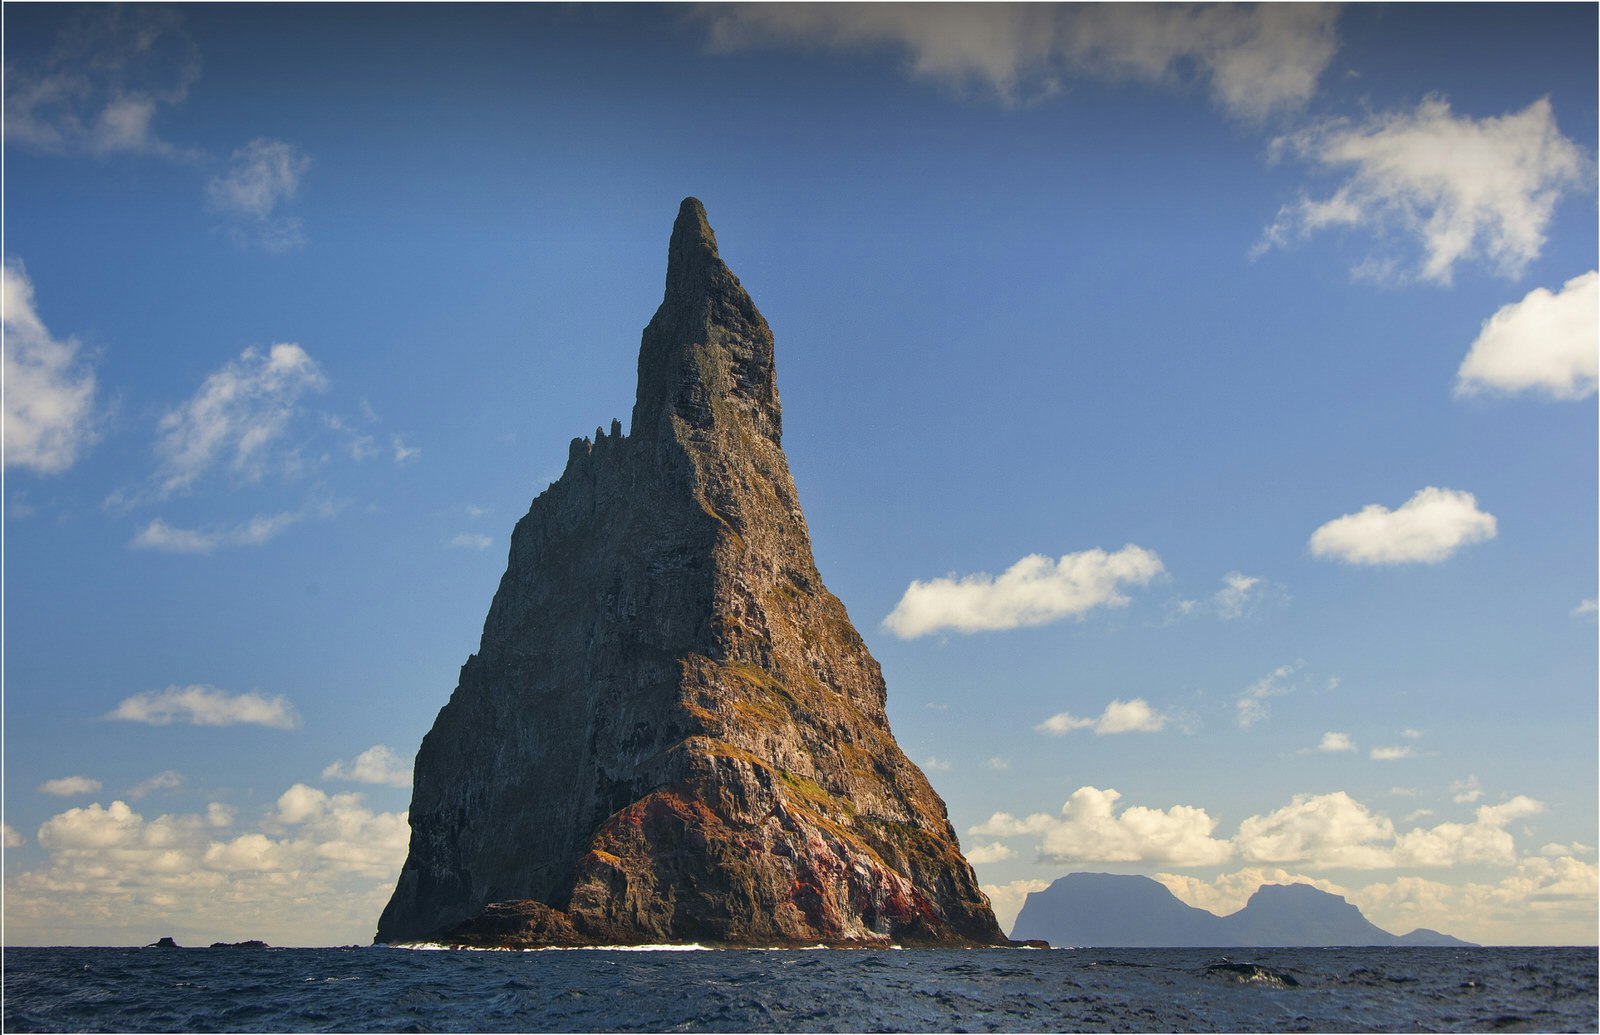 Balls Pyramid rock formation, which lies 20km southeast of Lord Howe Island.